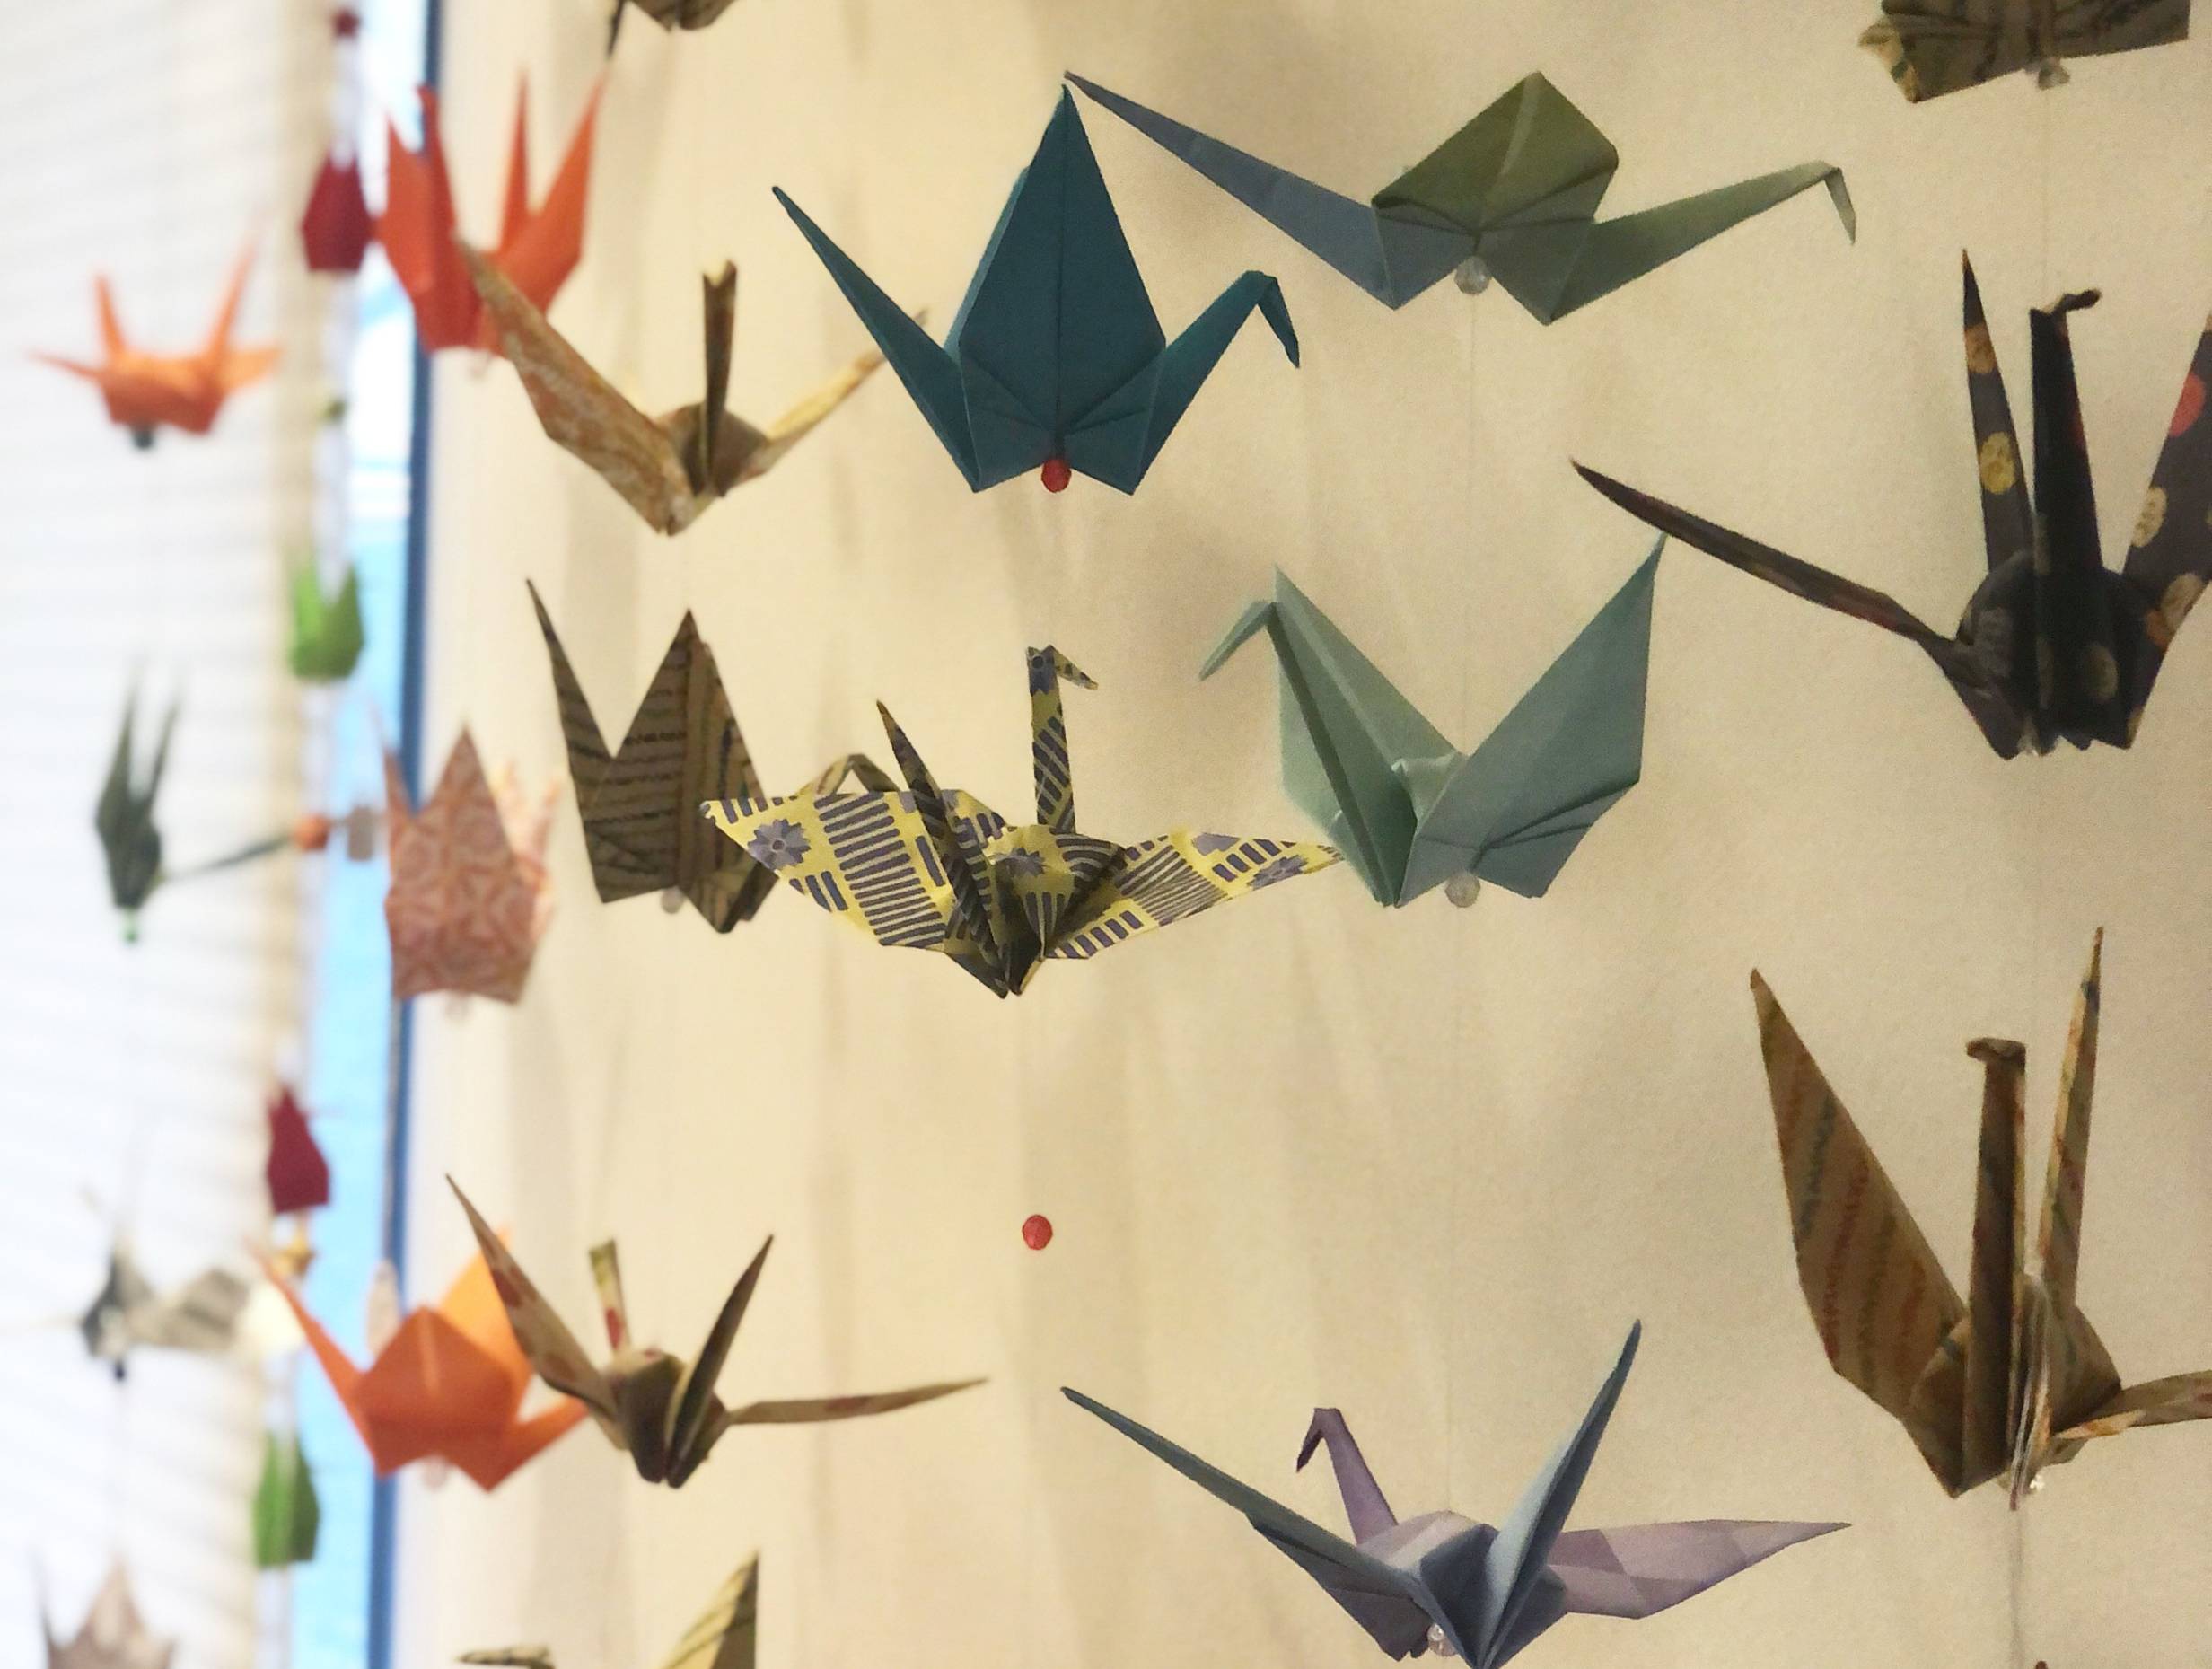 Paper cranes in various colors hang in vertical lines on string along a white wall at Japan House. Photo by Alyssa Buckley.